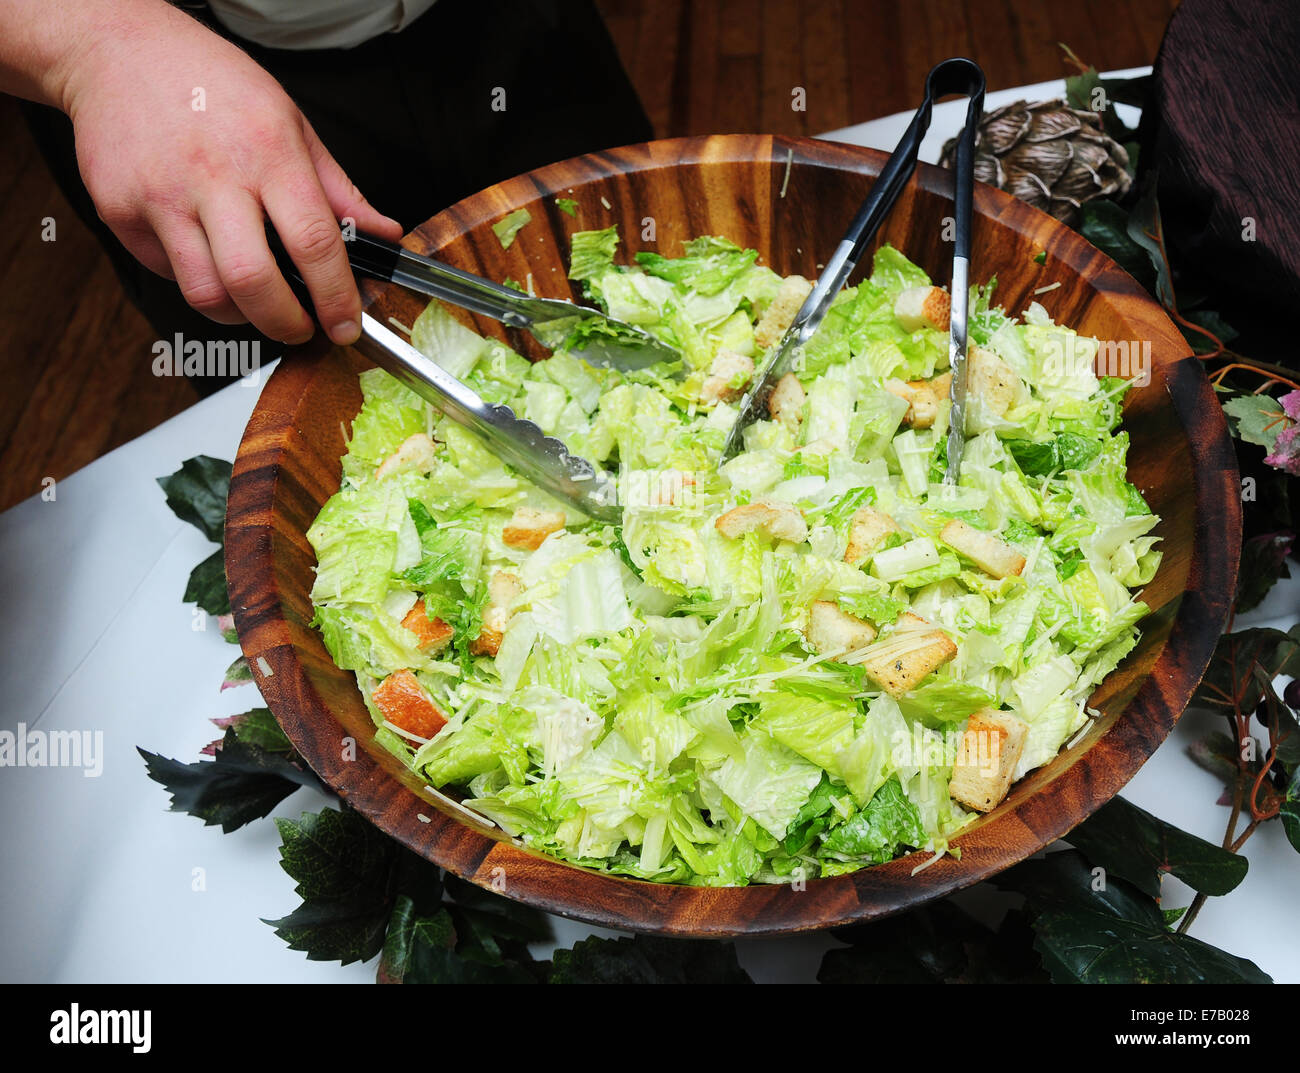 A Caesar salad being served at a buffet, Stock Photo